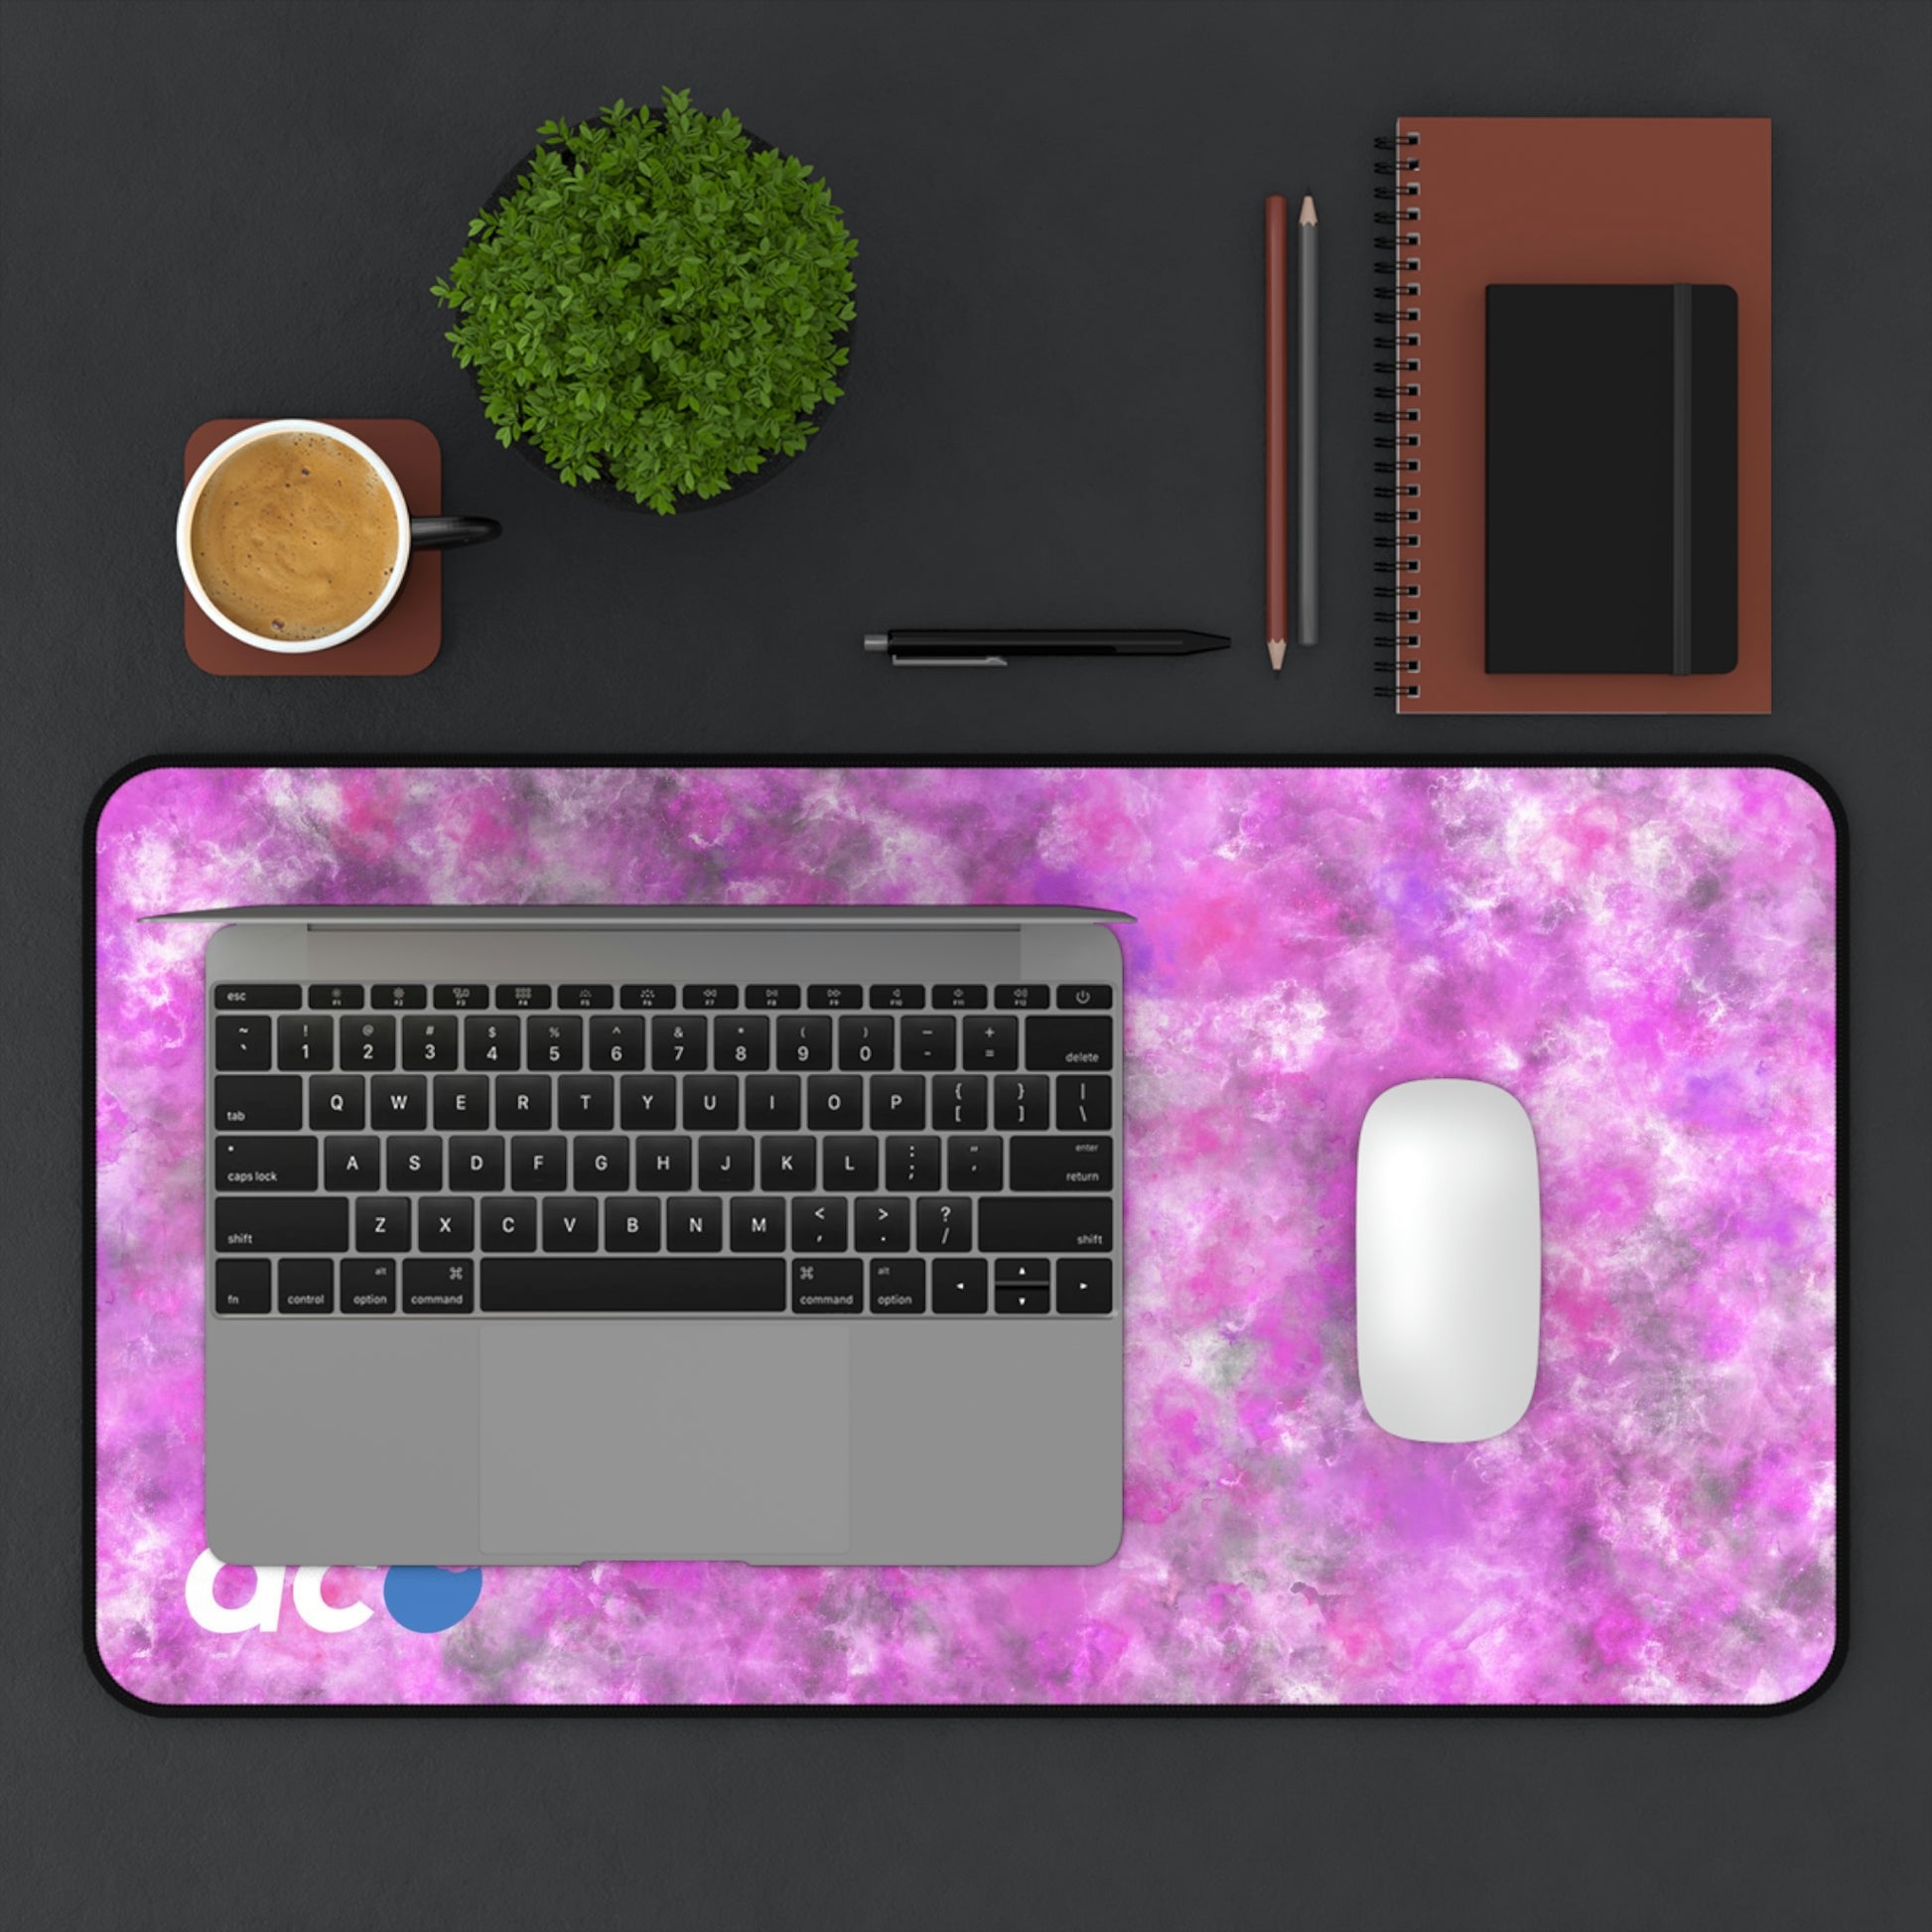 A 12" x 22" desk mat with a fluffy mix of pink, white, and gray. A laptop and mouse sit on top of it.